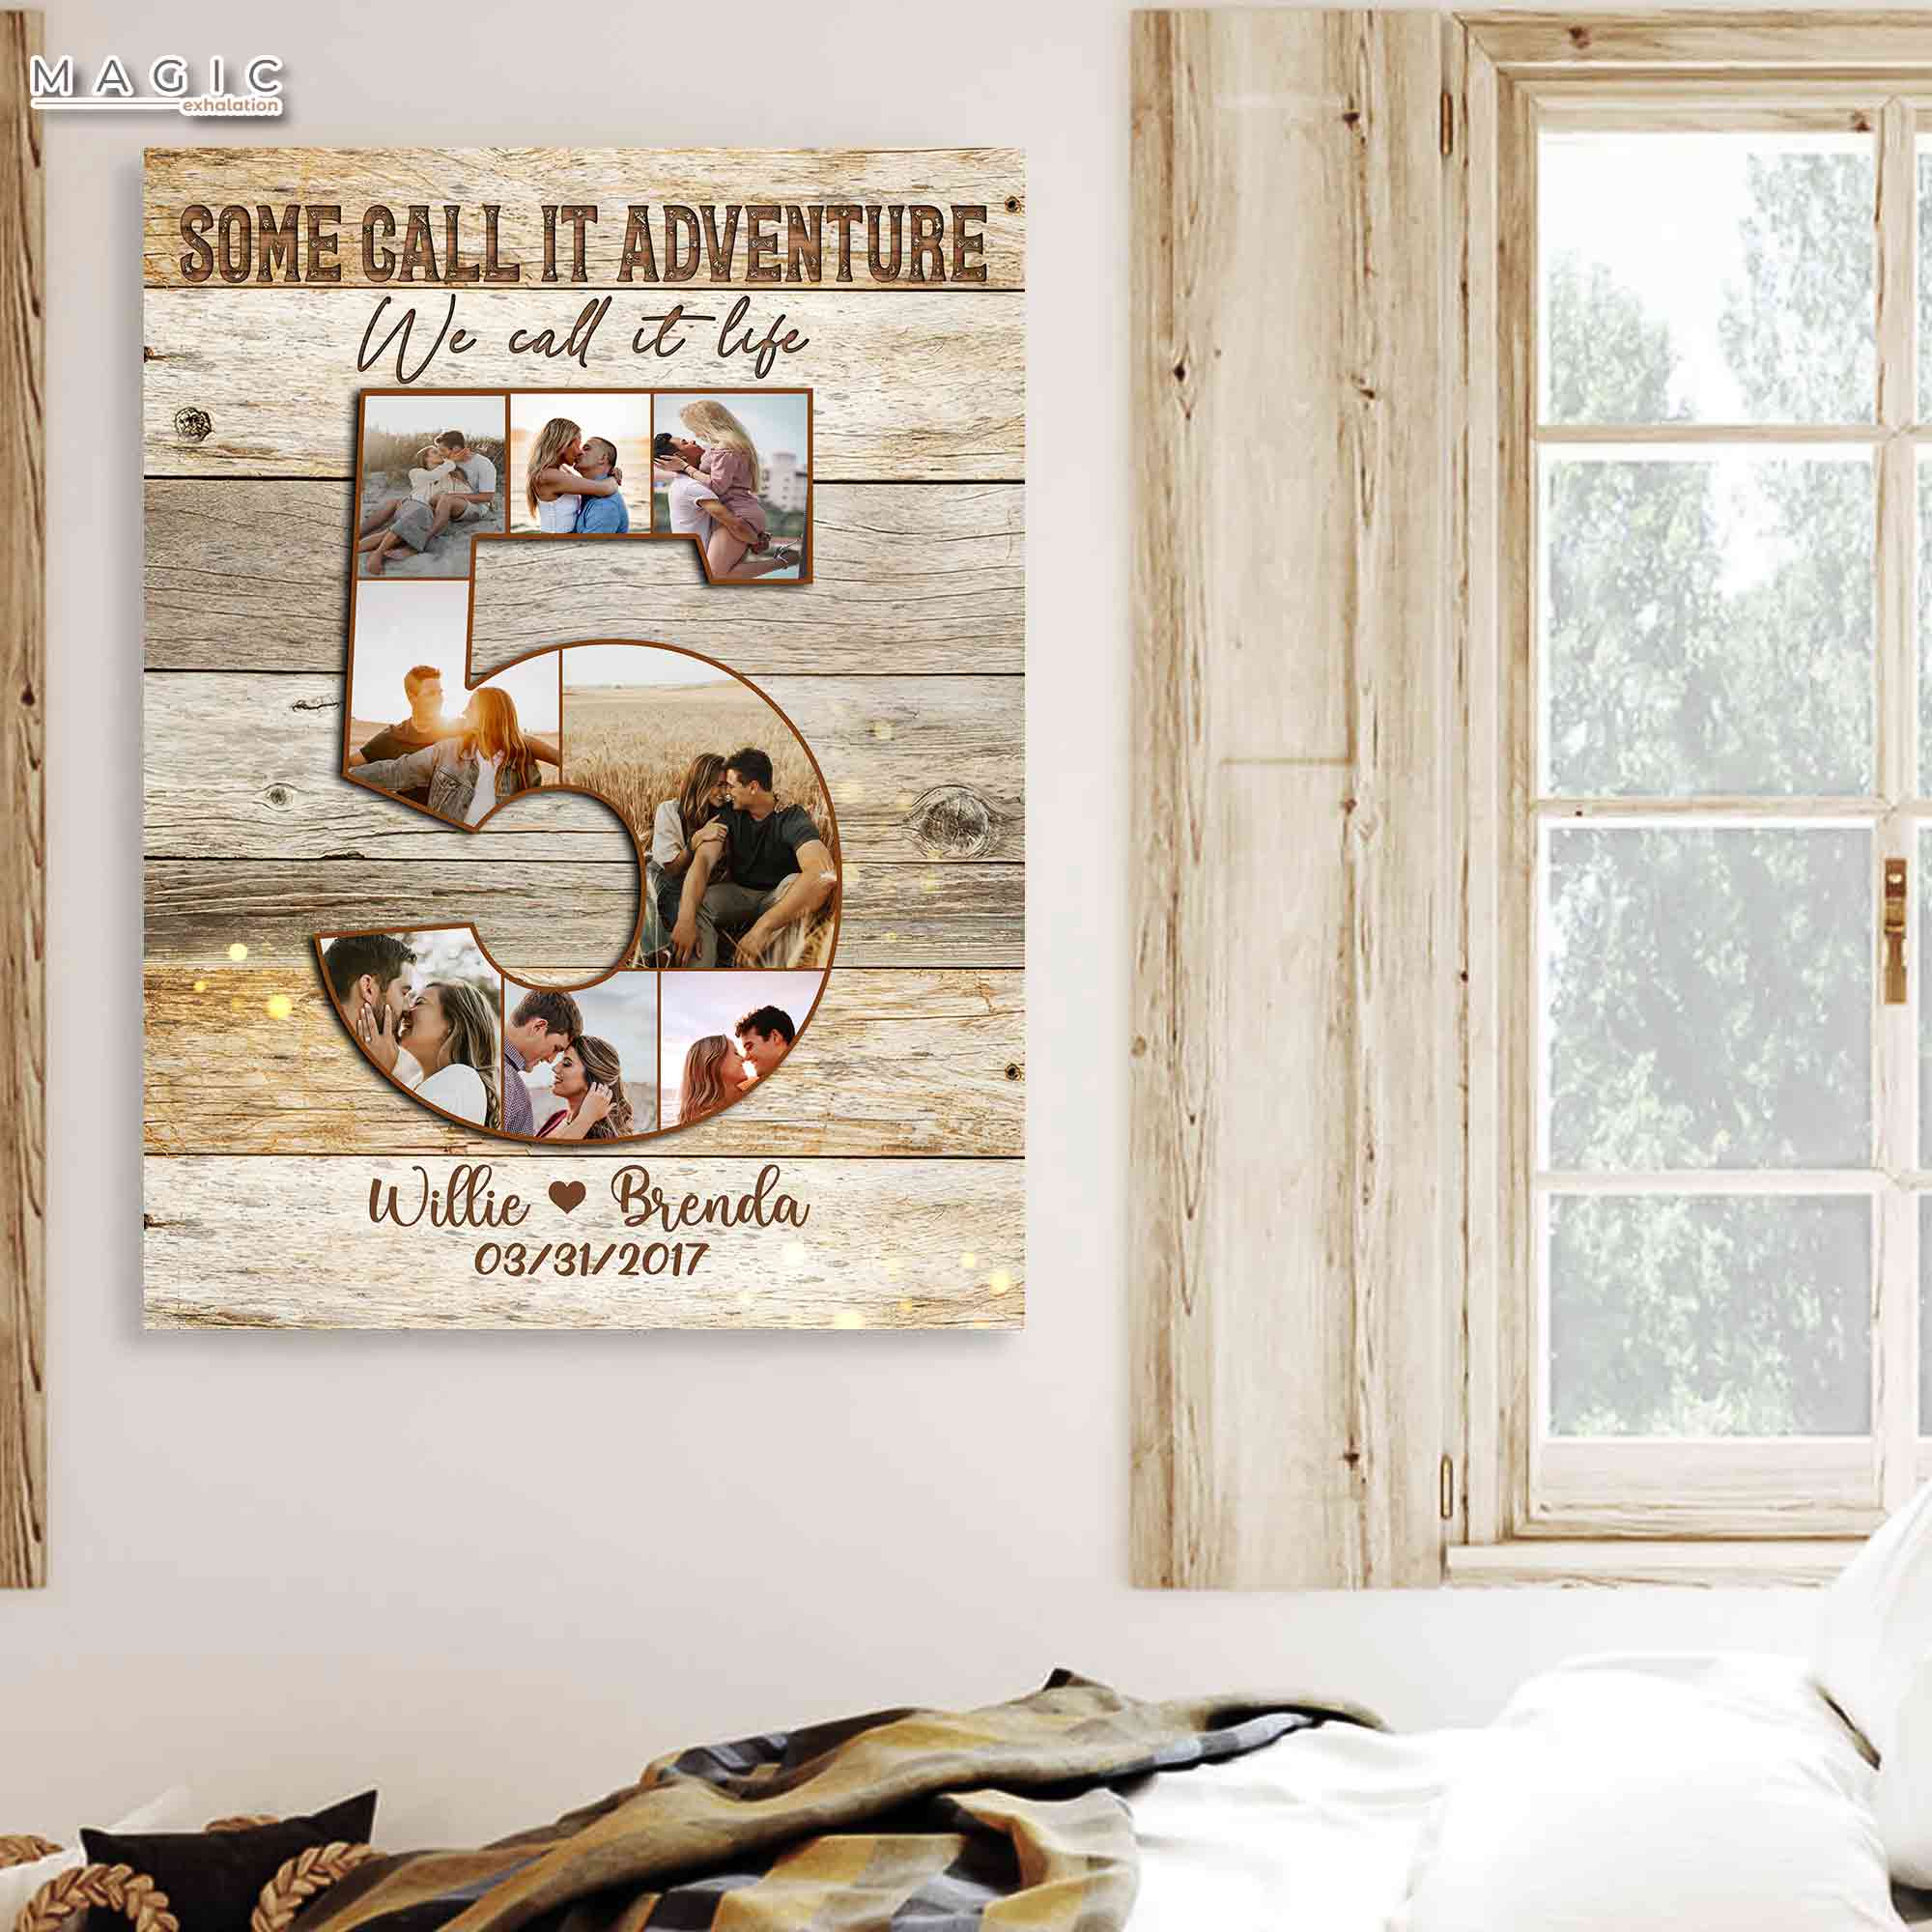 Personalized Valentine's Day Gifts, 5th Anniversary Gift for Husband,  Picture Collage Some Call It Adventure Canvas Print - Magic Exhalation